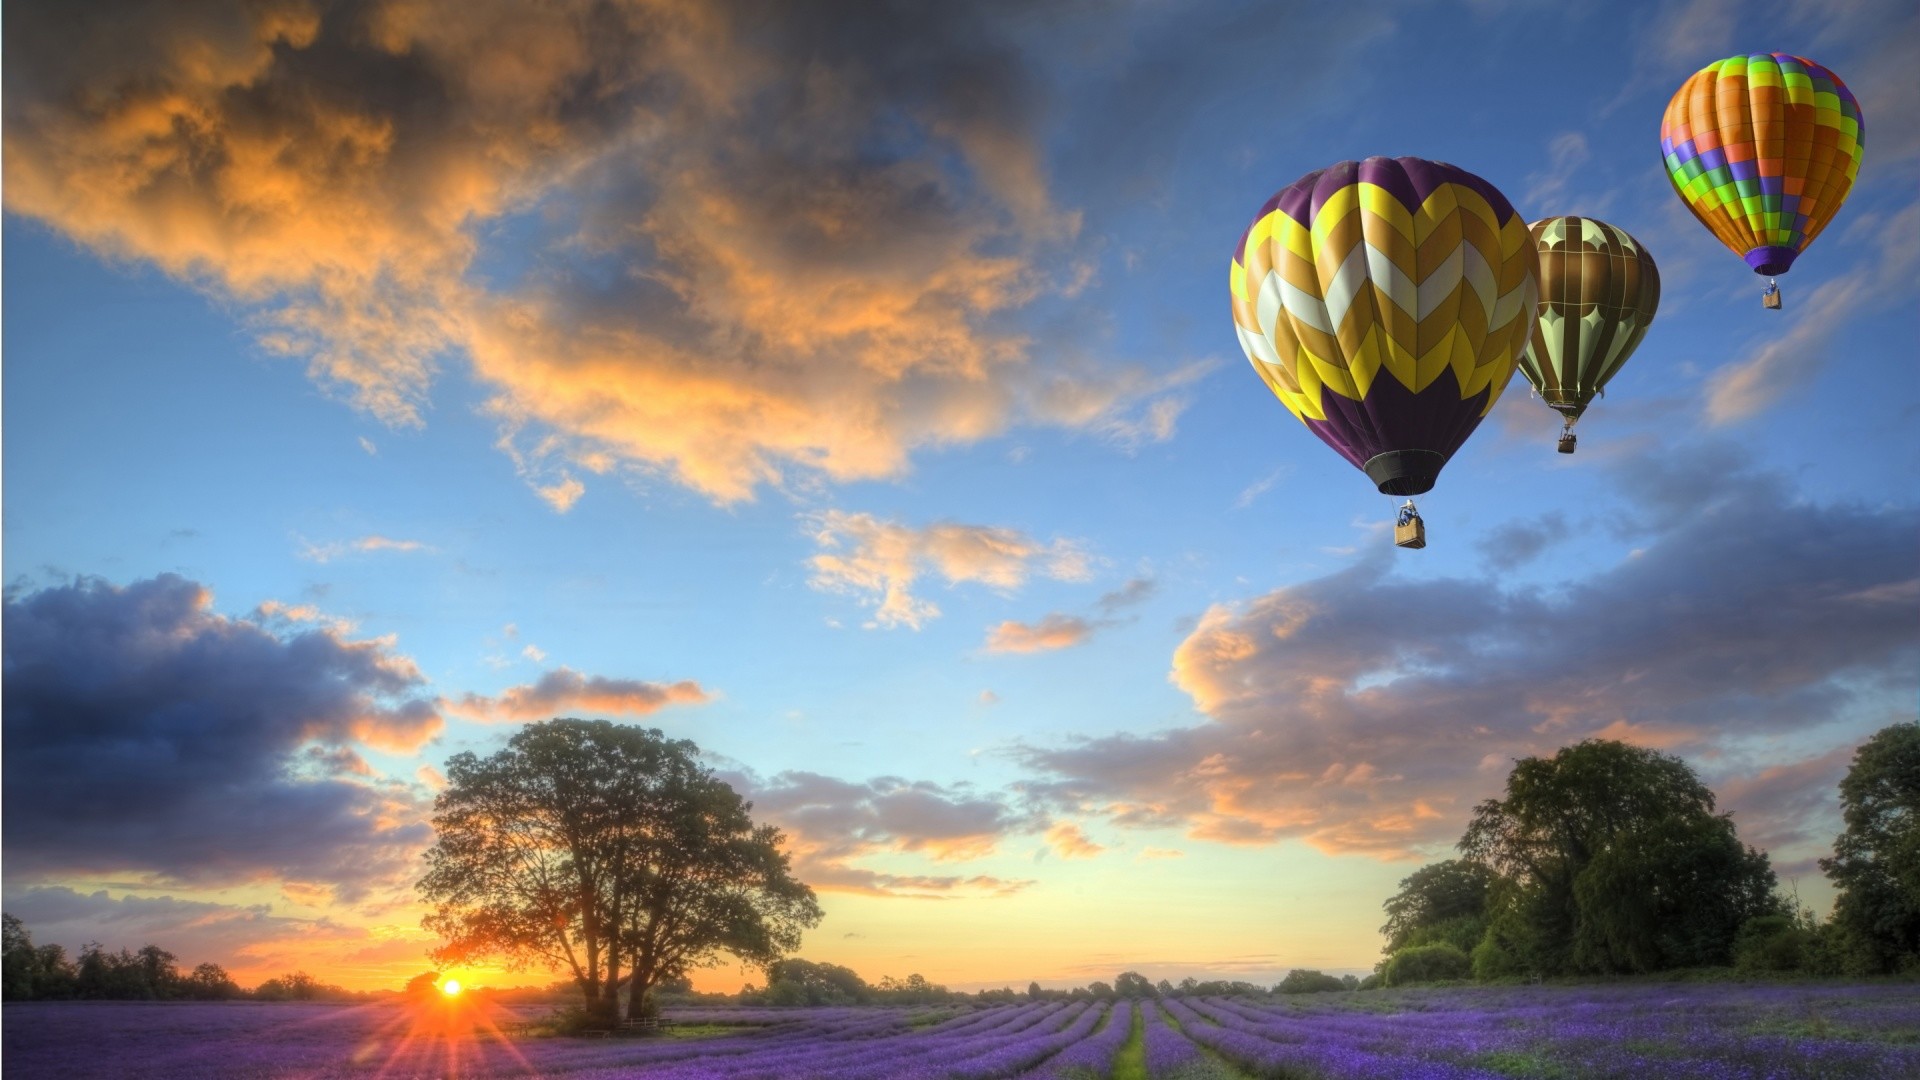 1920x1080 datsuncarsandparts.com rating, id-4053373674 | Colorful hot air balloons  flying over on